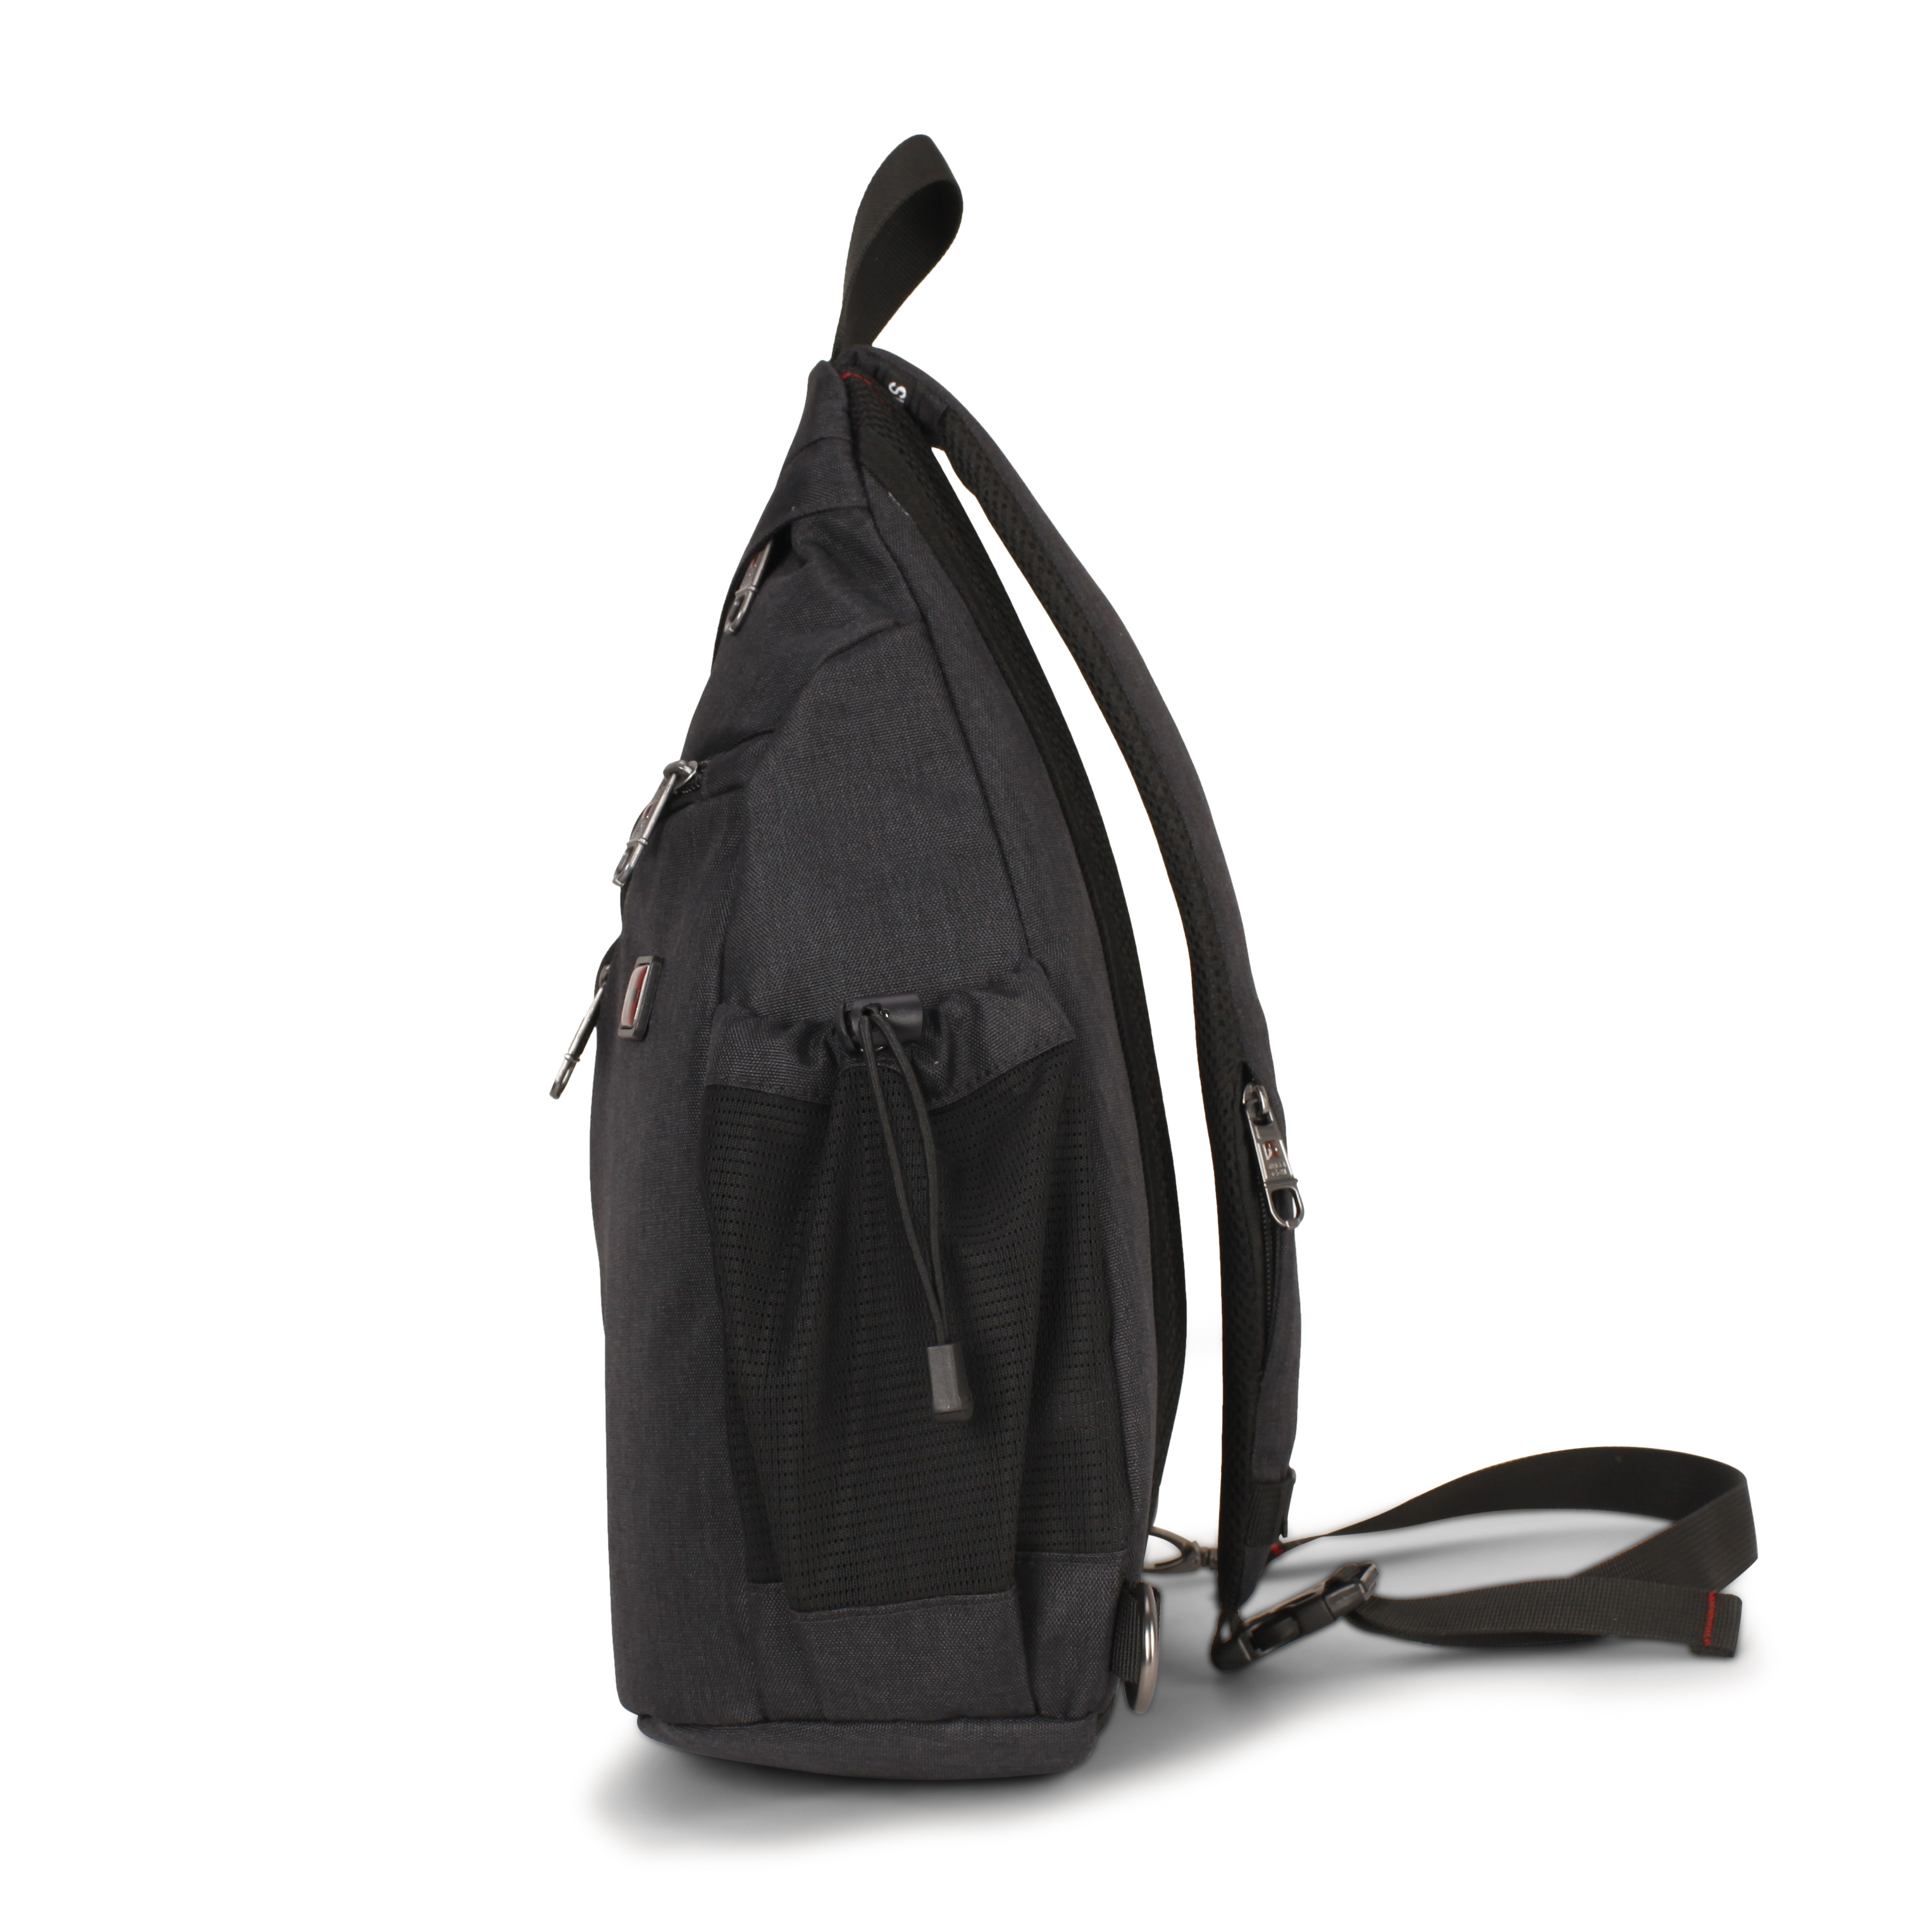 SwissTech Travel Sling Backpack, Black (All Ages) (Walmart Exclusive) - image 3 of 10